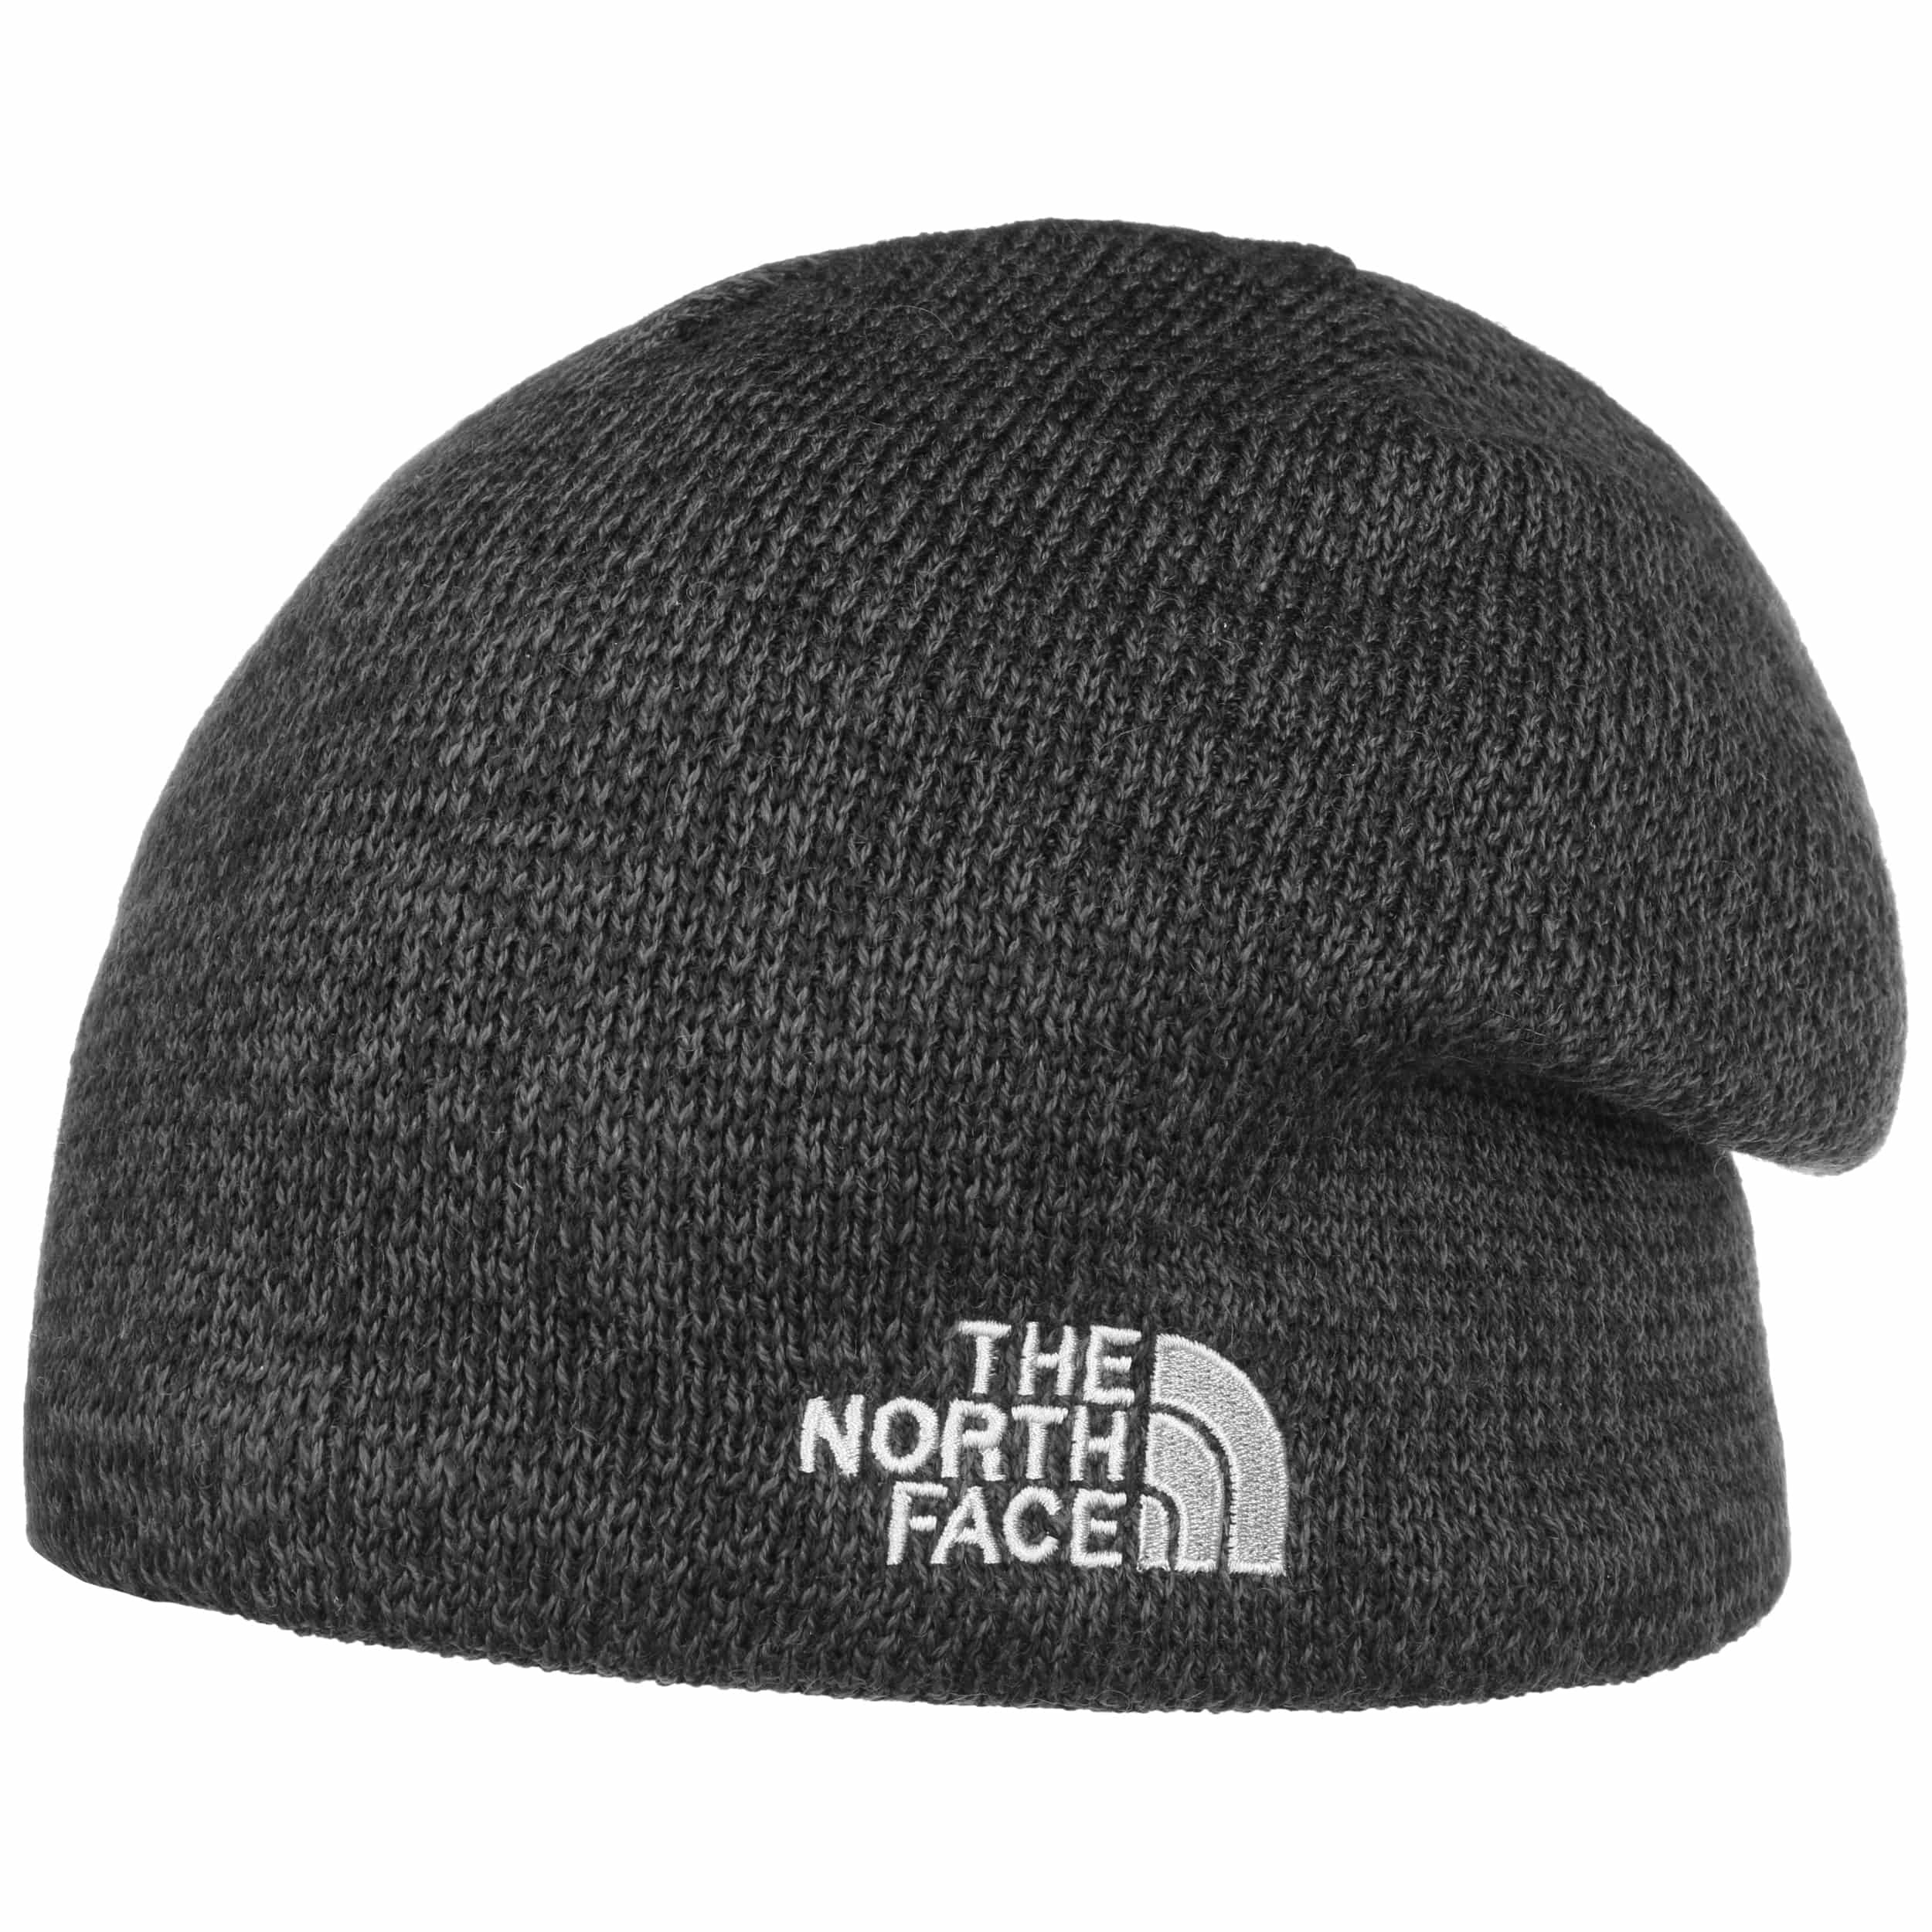 Jim Beanie Hat by The North Face - 37,95